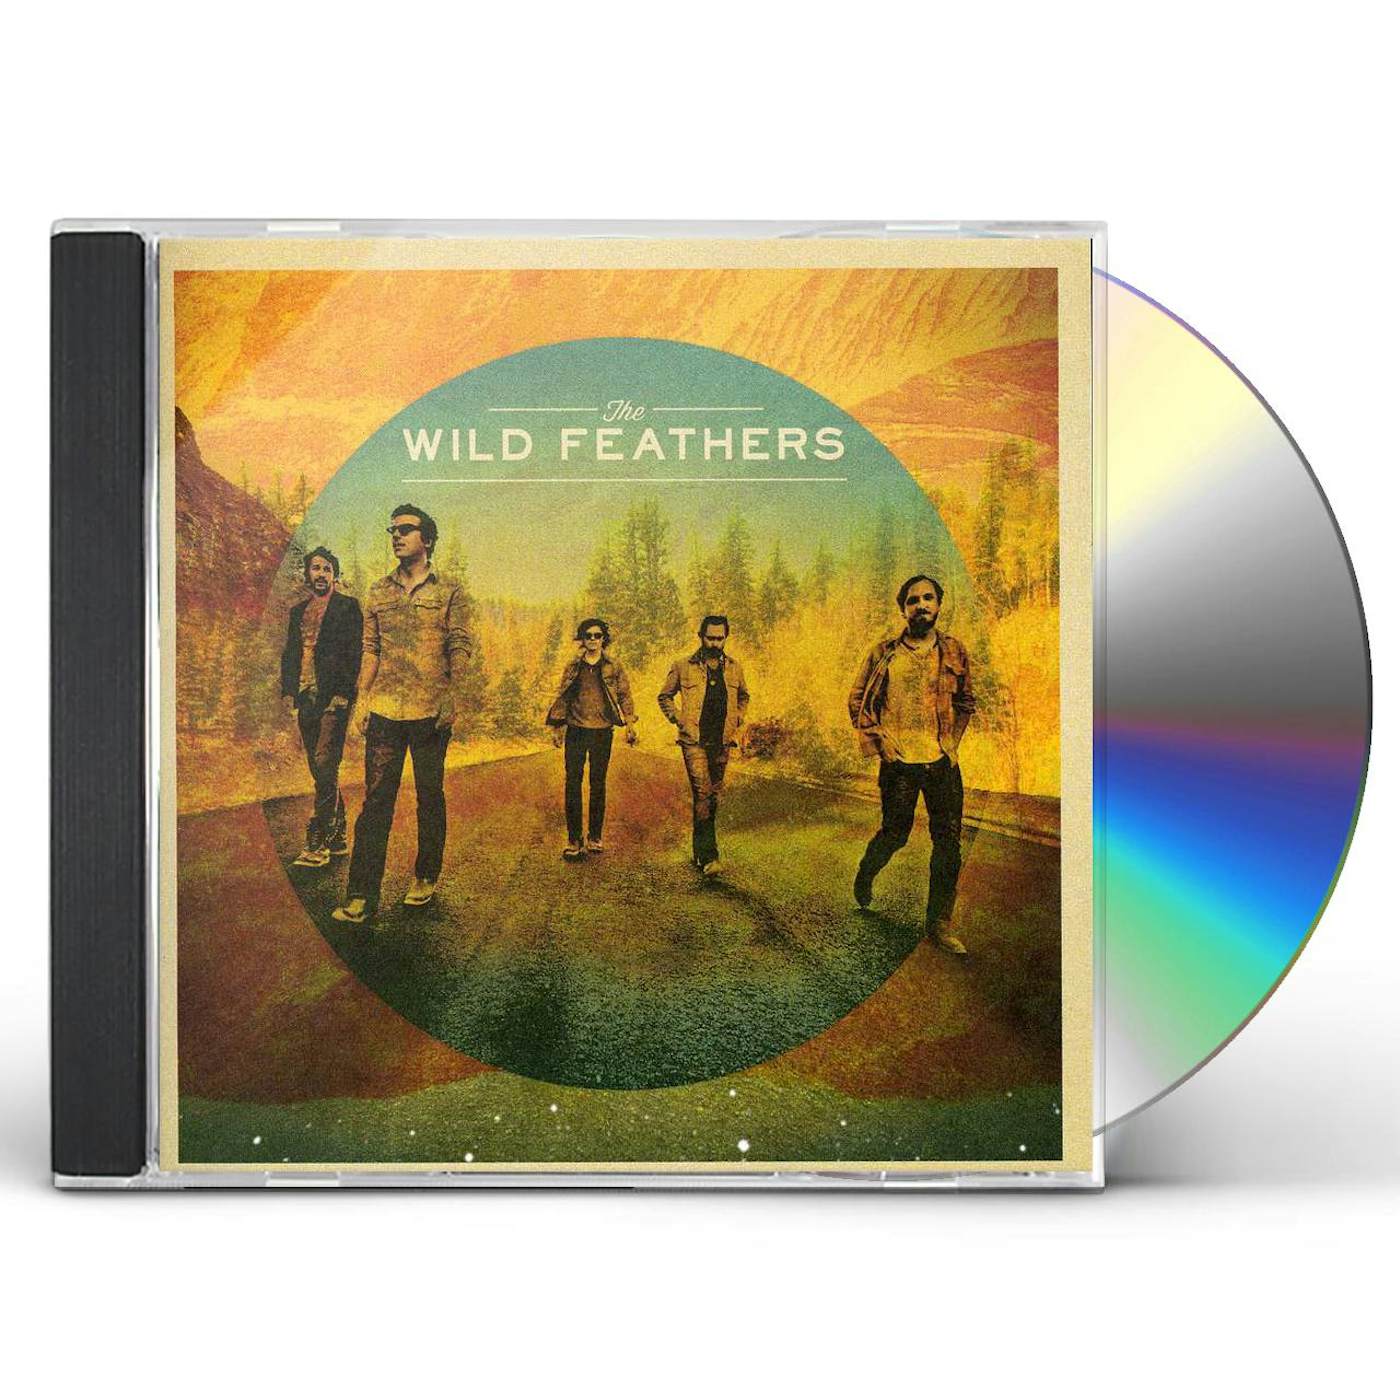 The Wild Feathers CD